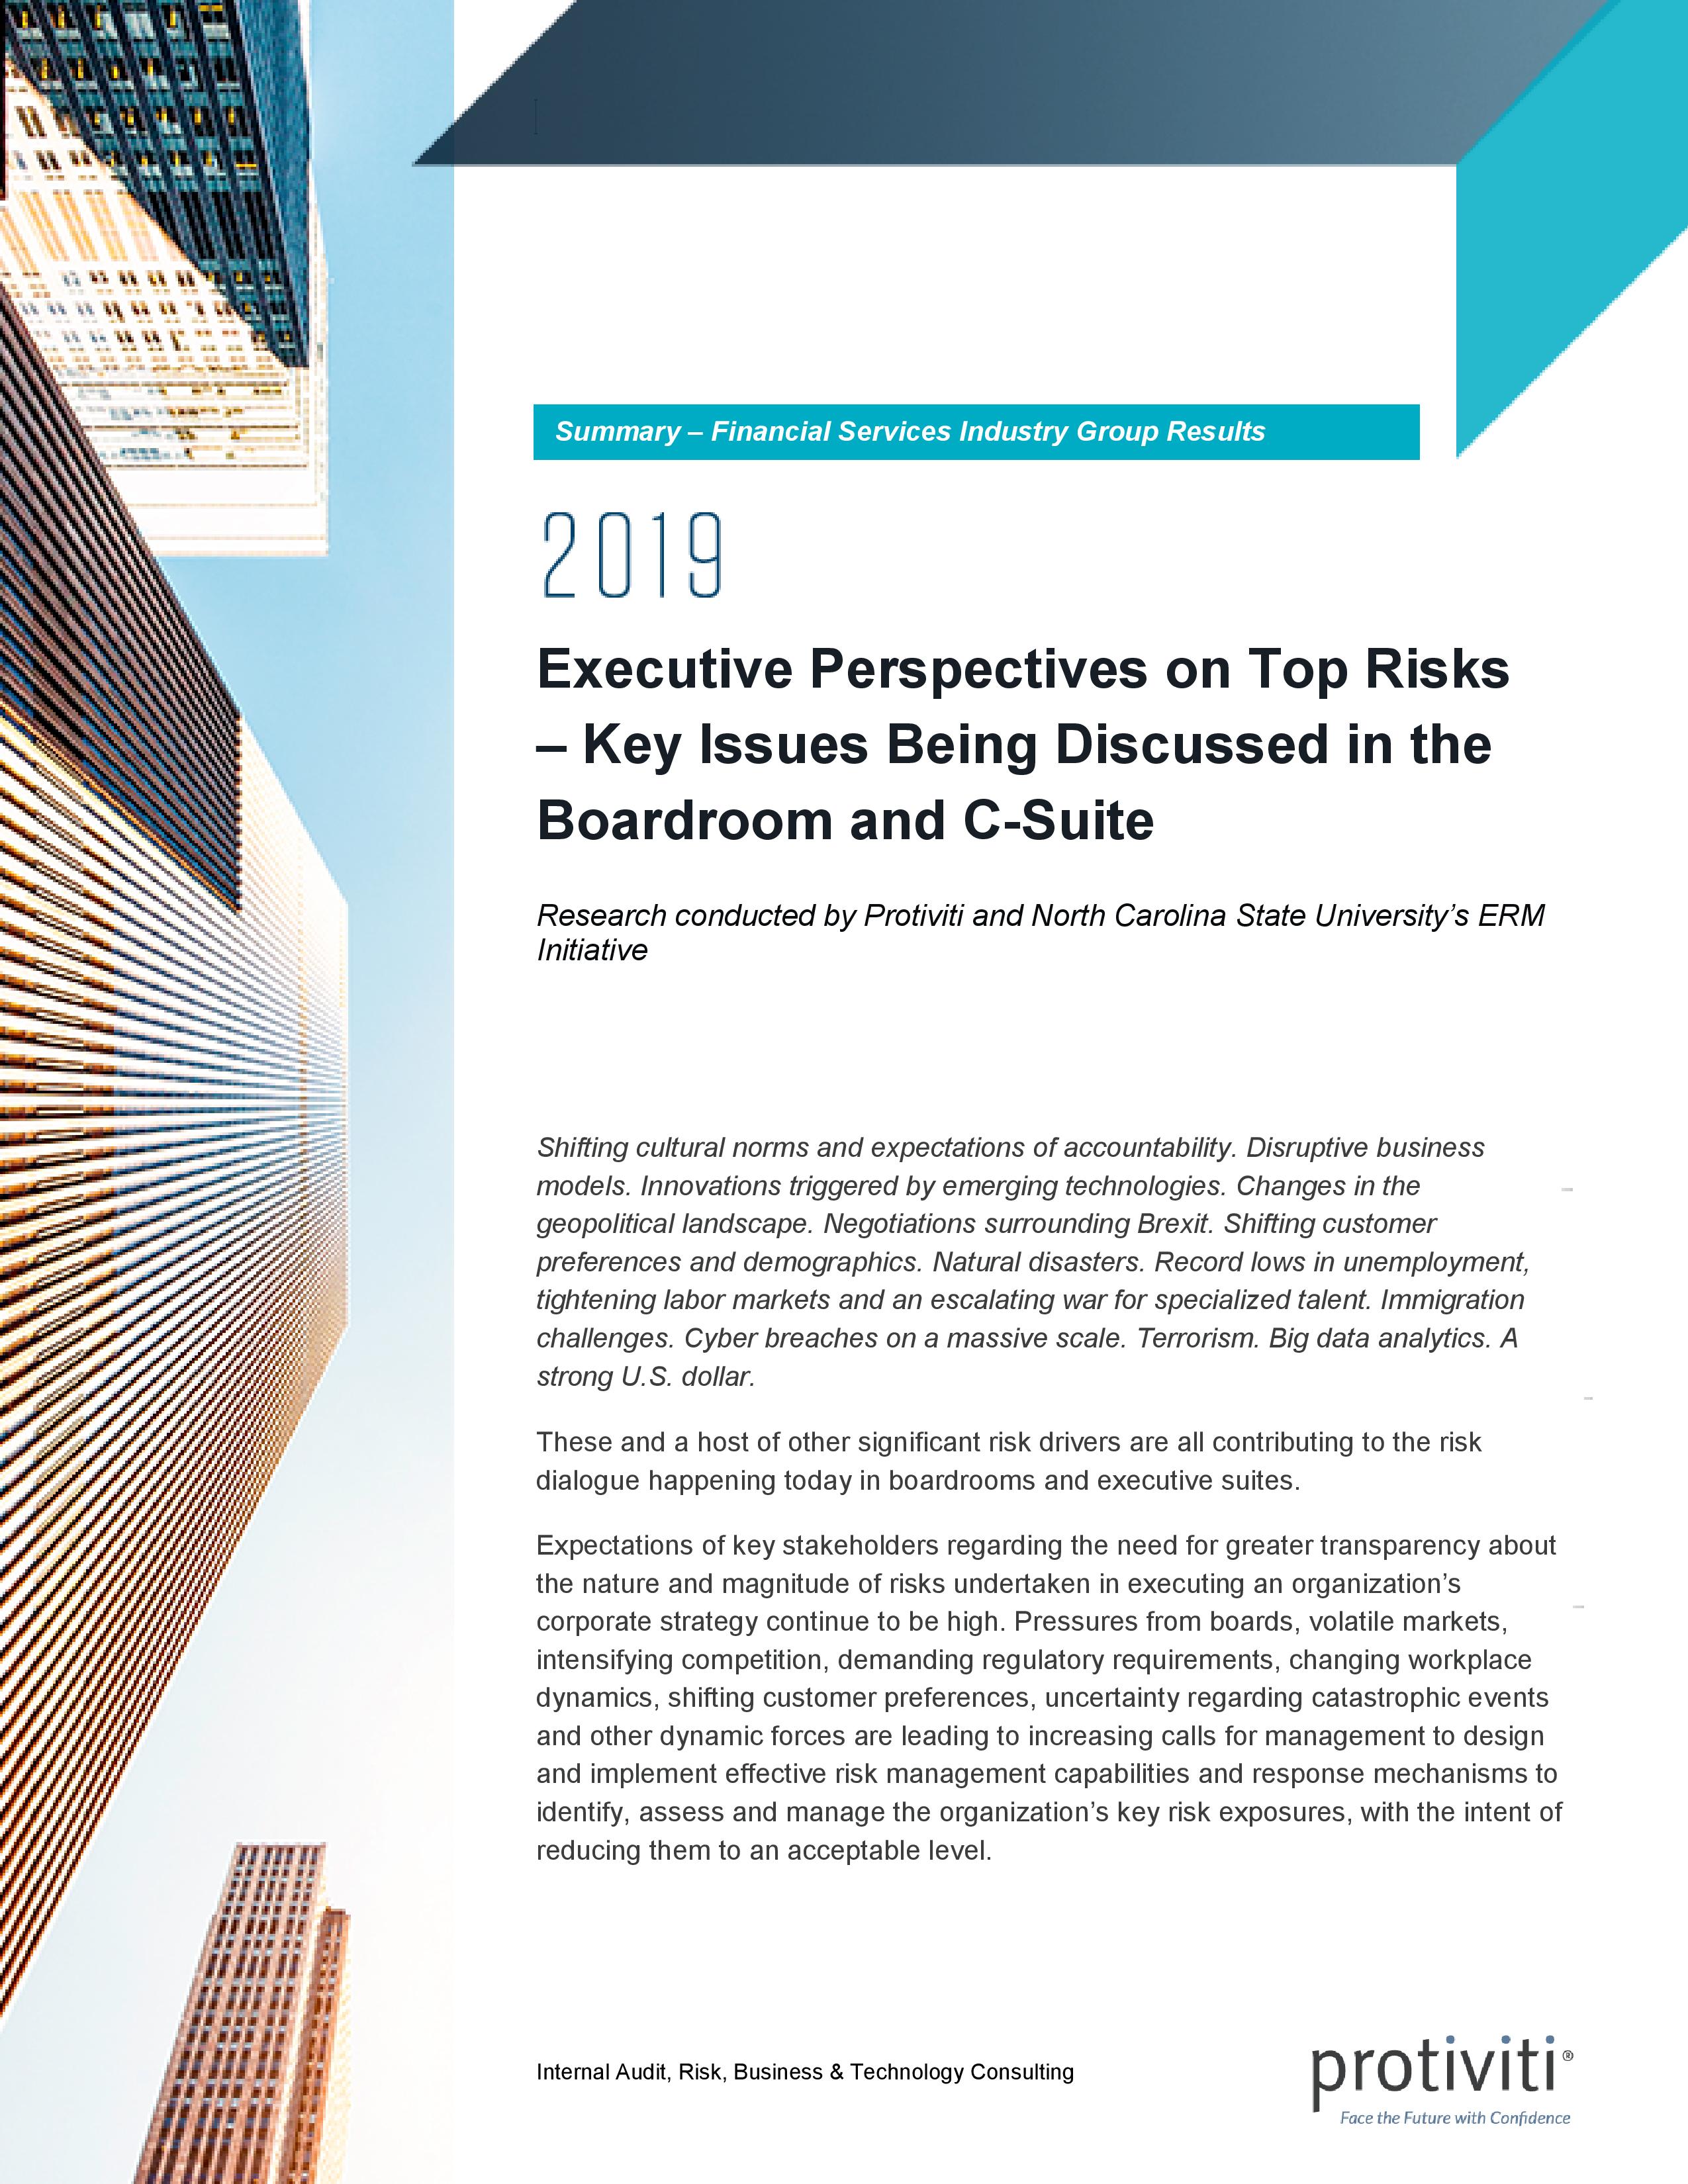 Screenshot of the first page of Executive Perspectives on Top Risks in 2019